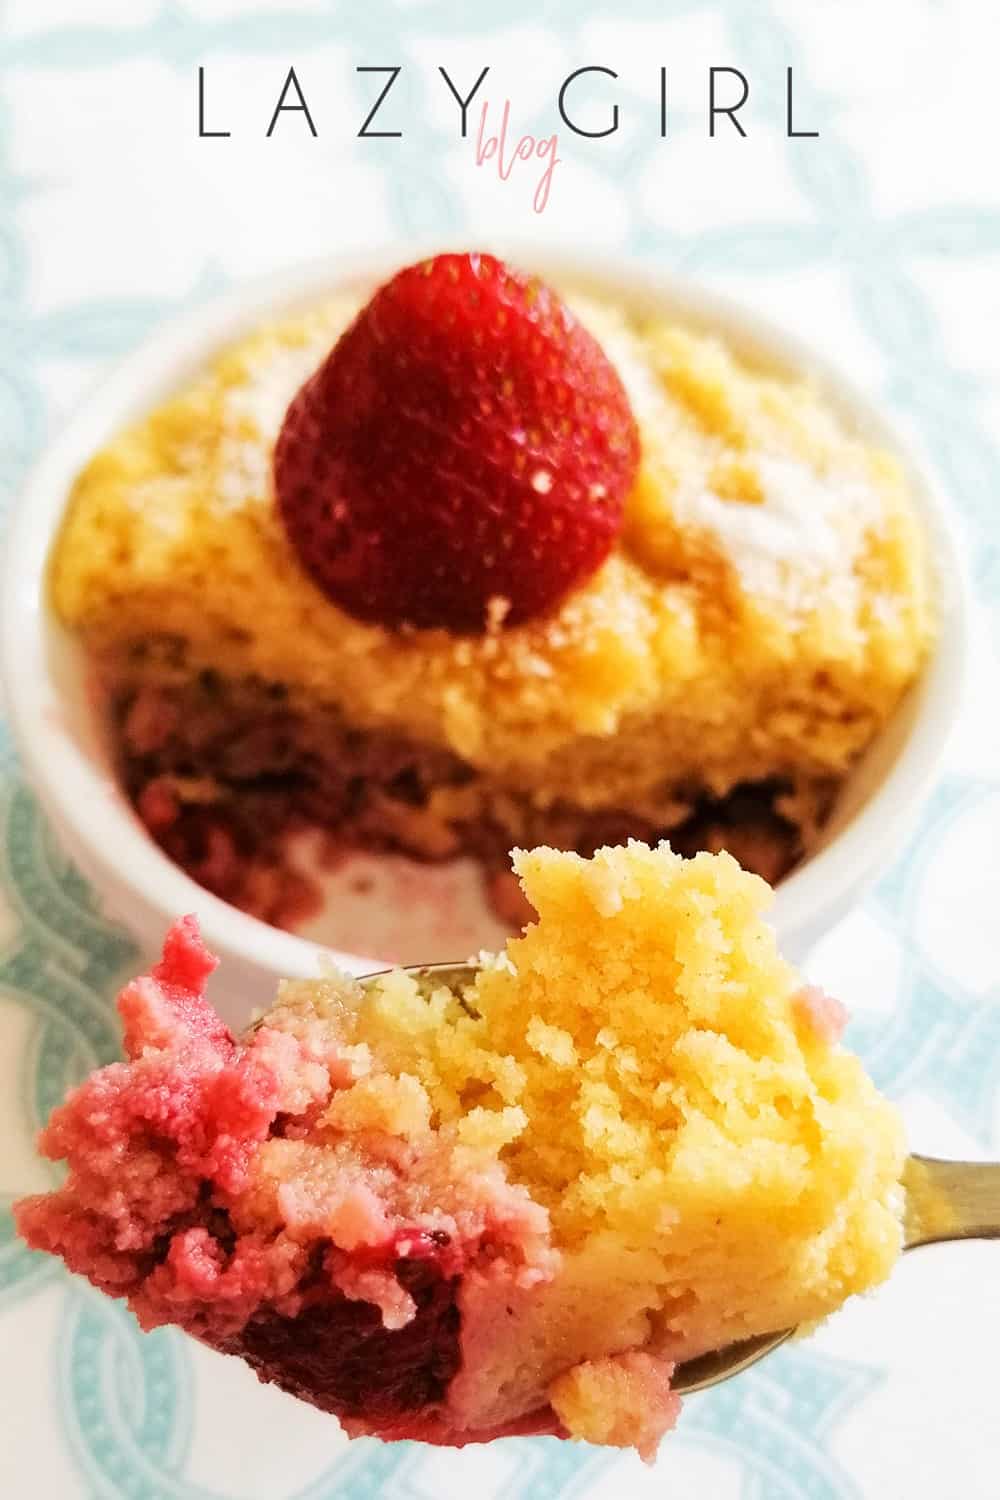 This loEasy Keto Strawberry Mug Cake Recipe.w carb keto strawberry mug cake is super easy to make and yummy but it also looks good! The texture is so fluffy, yet dense enough to feel like an authentic cake. The strawberries also help to keep the cake moist. #ketomugcake #easyrecipe #microwavemugcake #strawberrymugcake